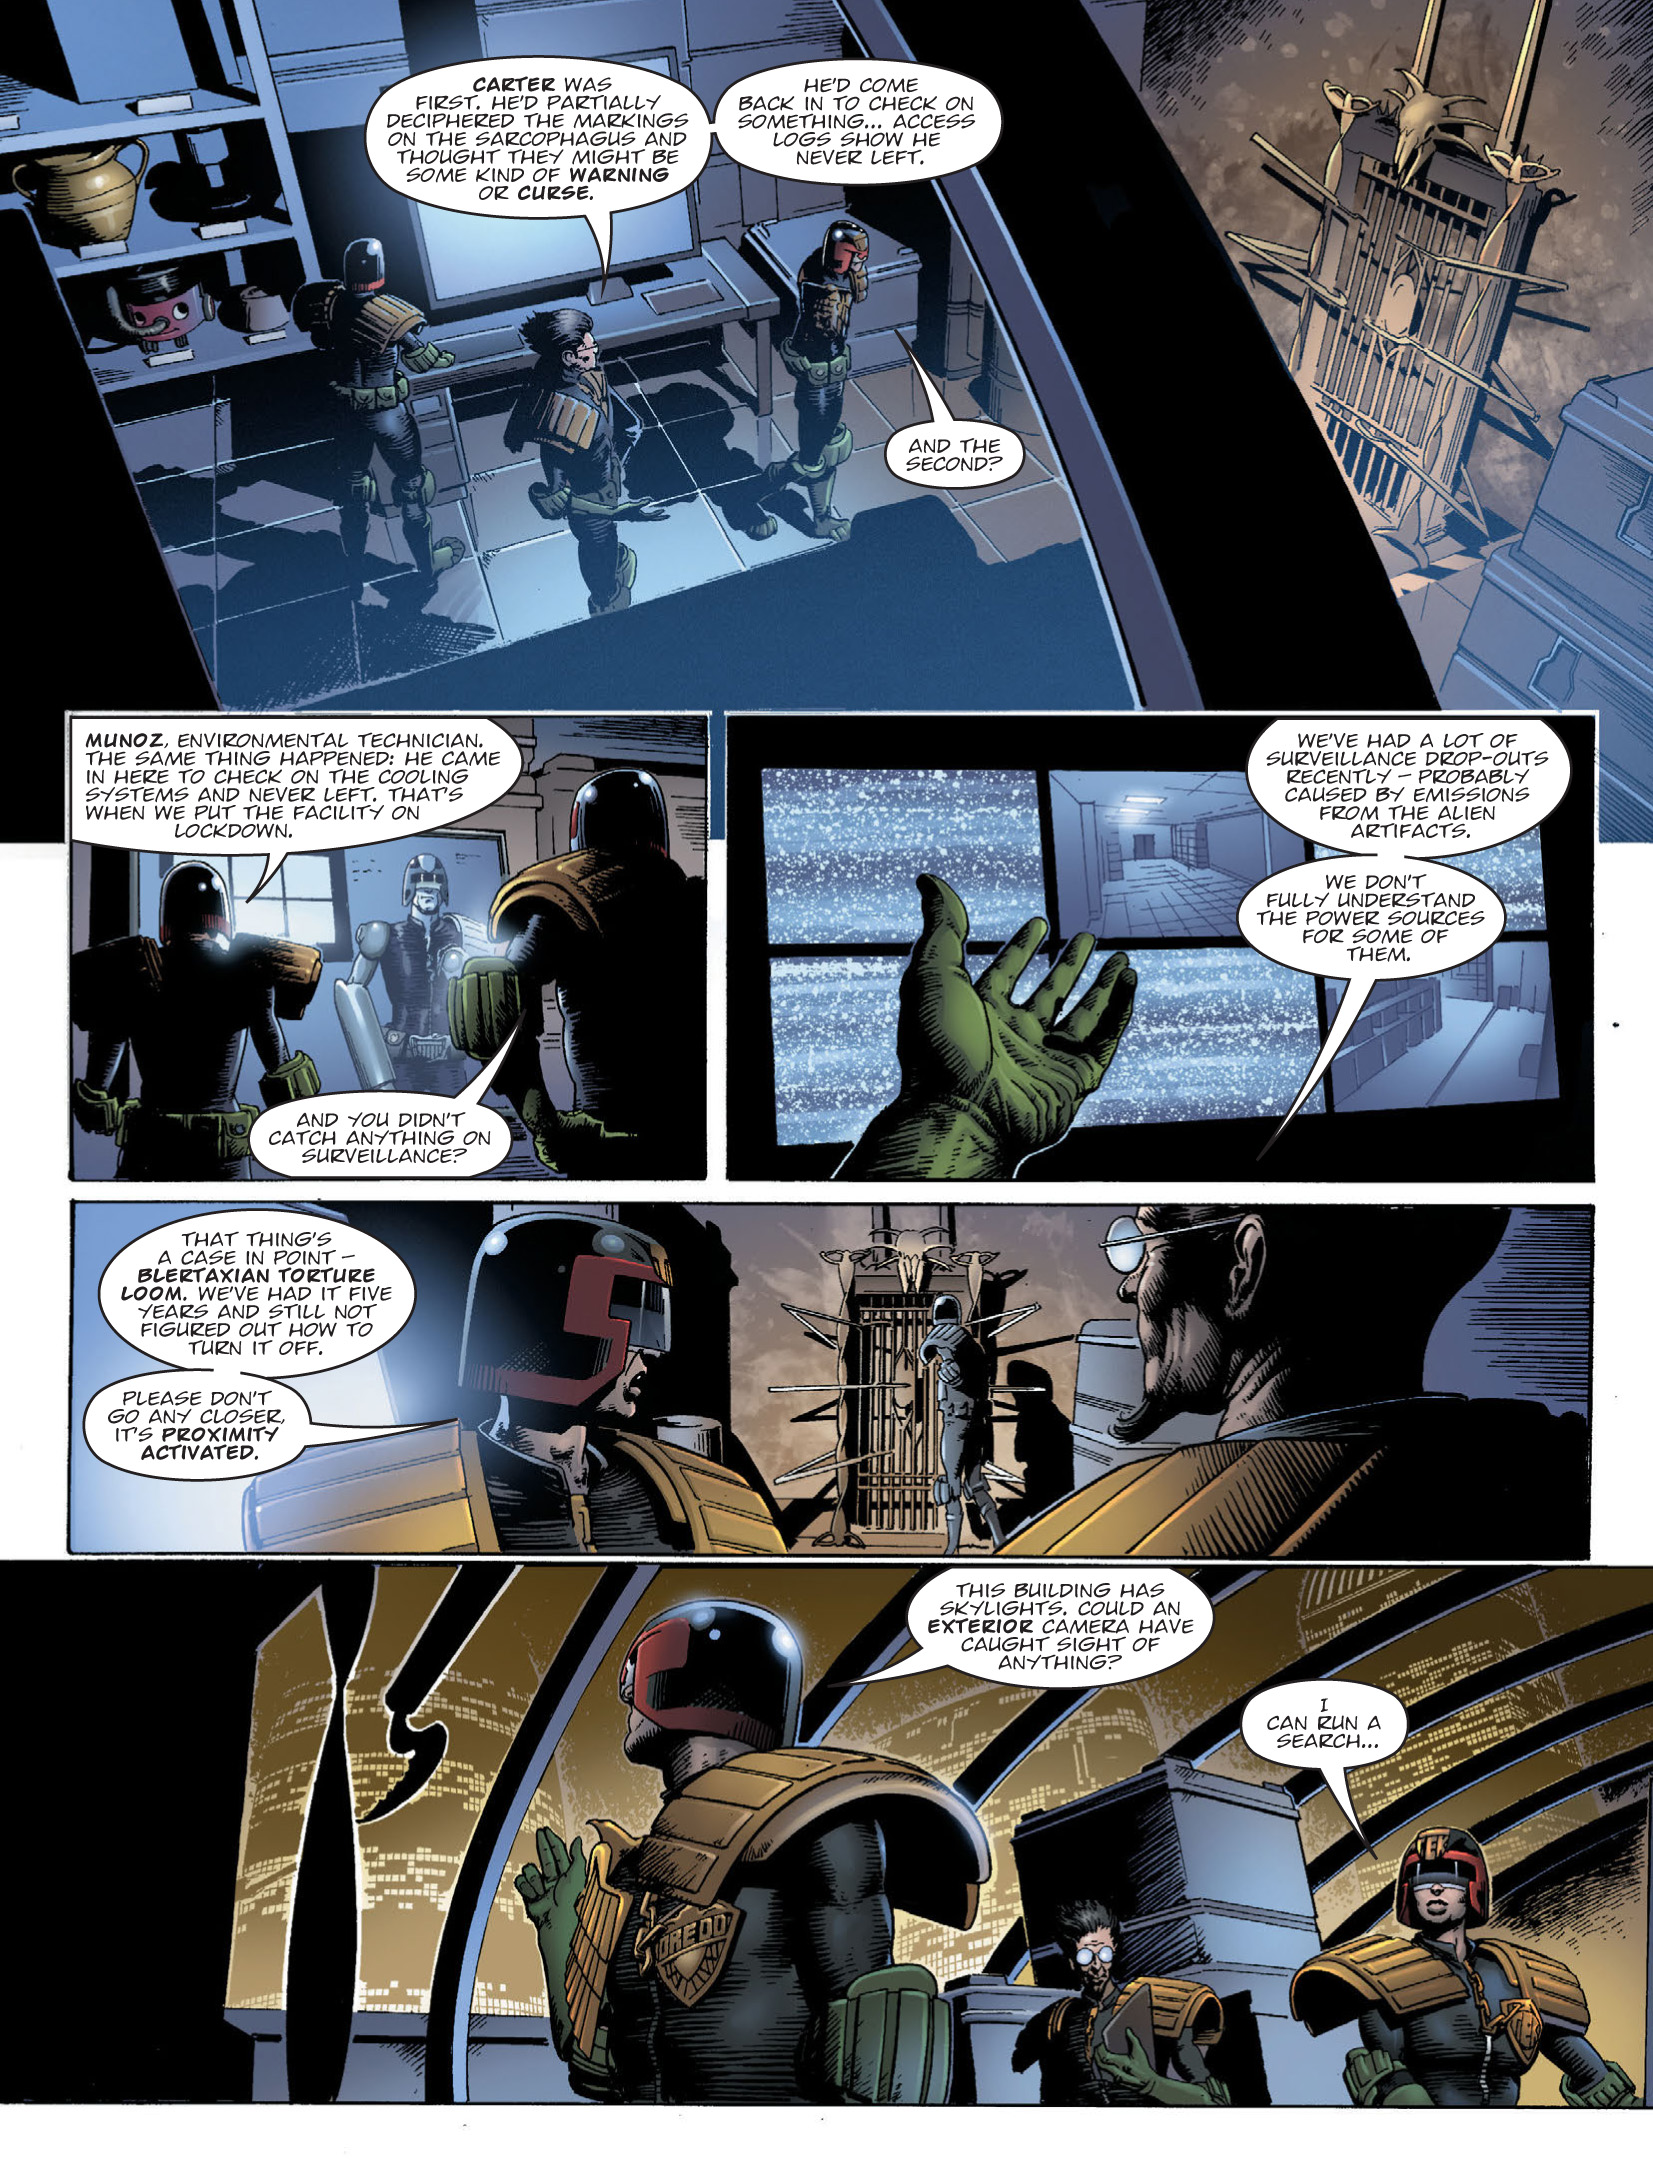 2000 AD: Chapter 2040 - Page 4